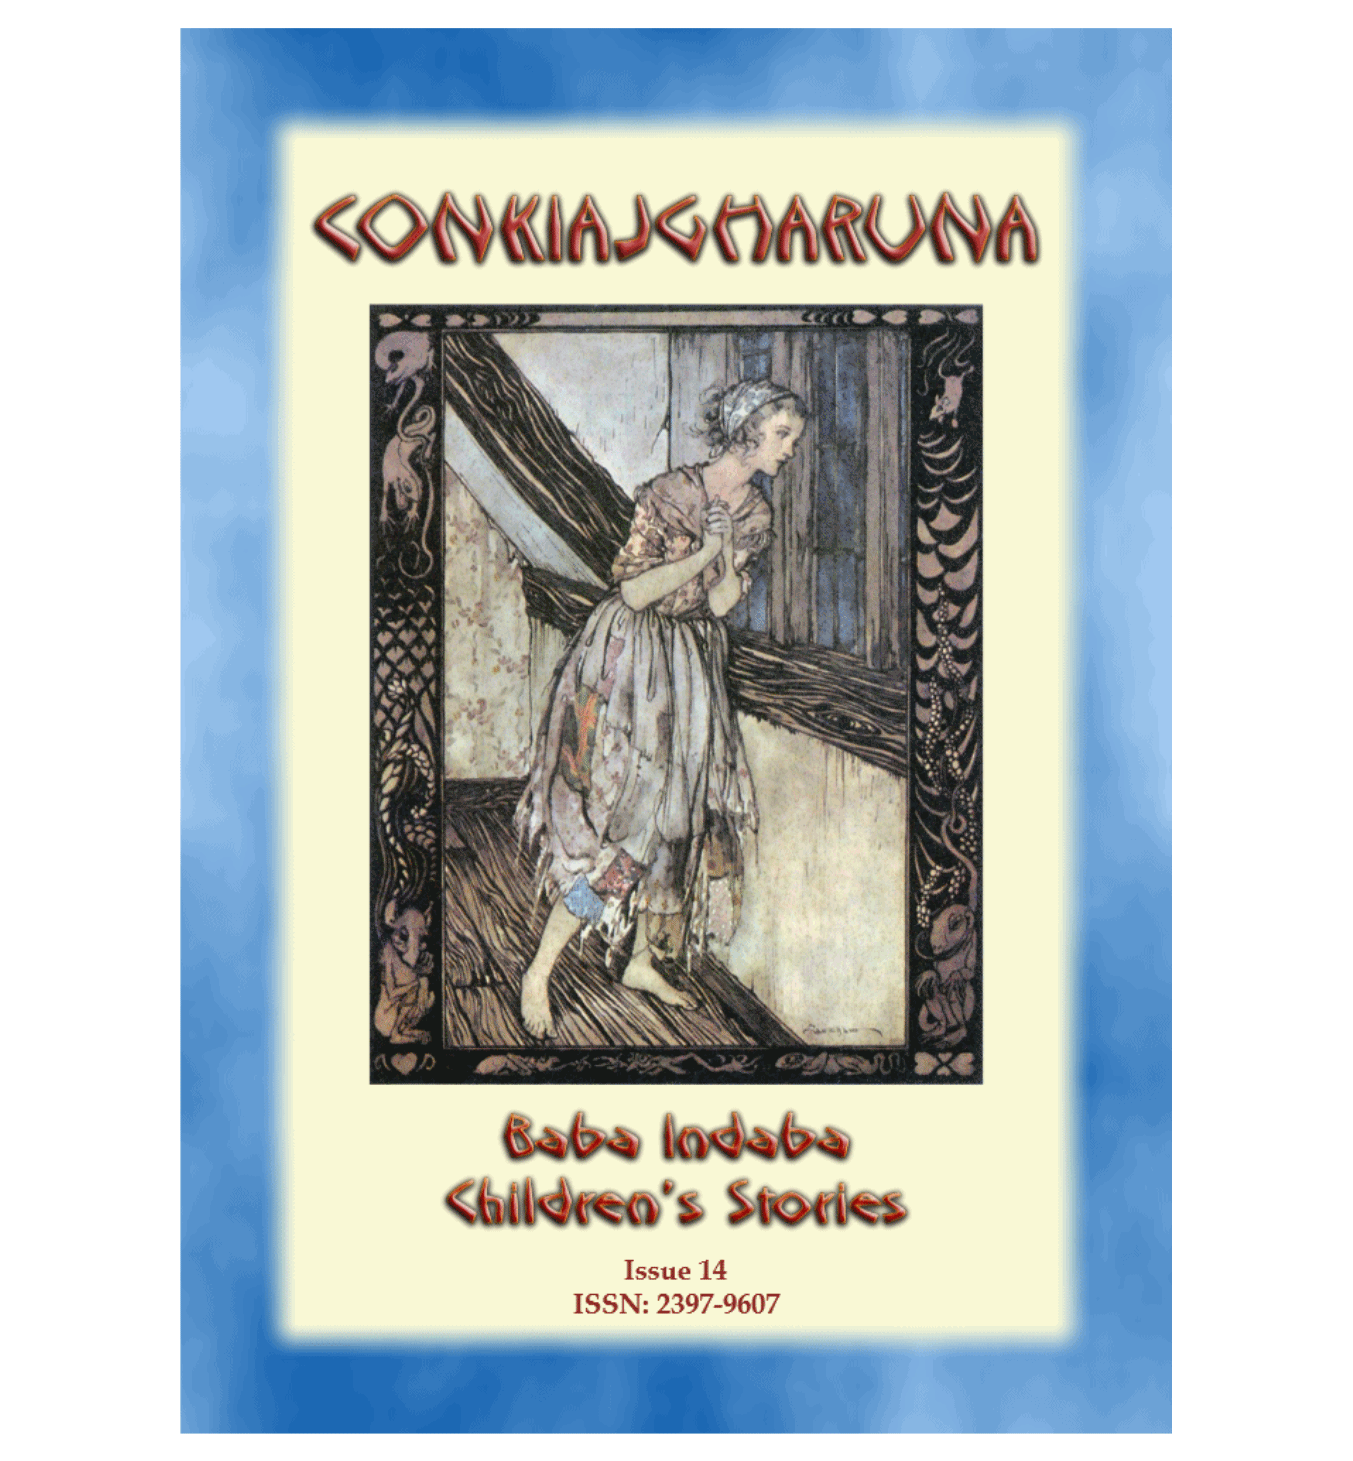 CONKIAJGHARUNA - A tale from the Republic of Georgia: Baba Indaba Children's Stories - Issue 014 